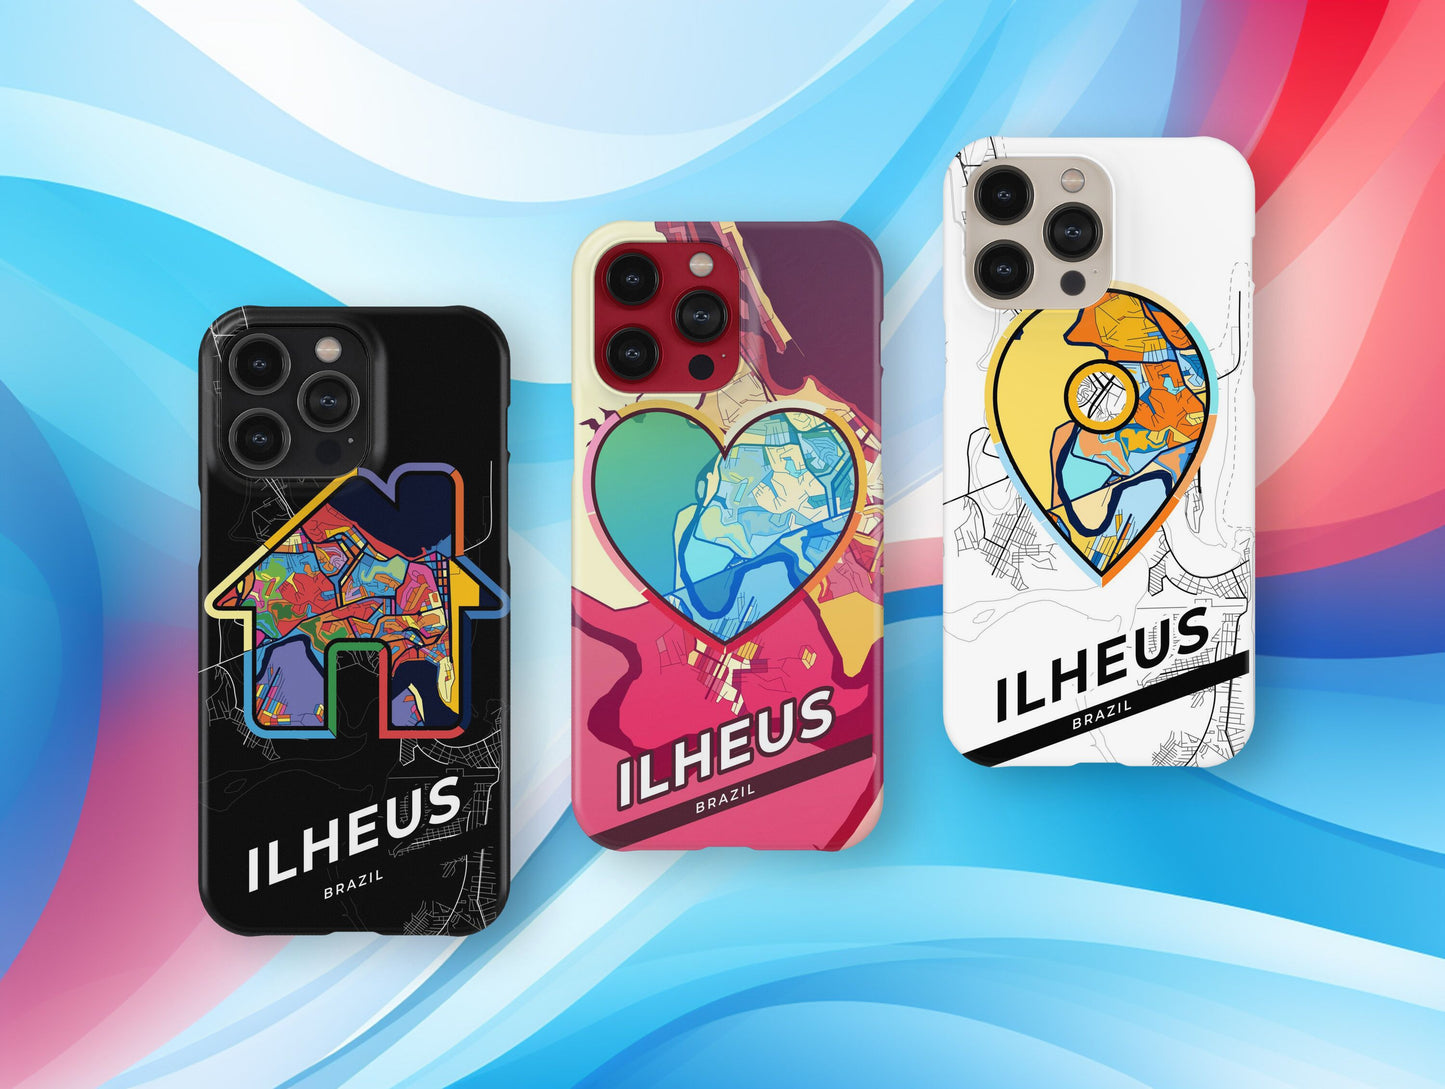 Ilheus Brazil slim phone case with colorful icon. Birthday, wedding or housewarming gift. Couple match cases.